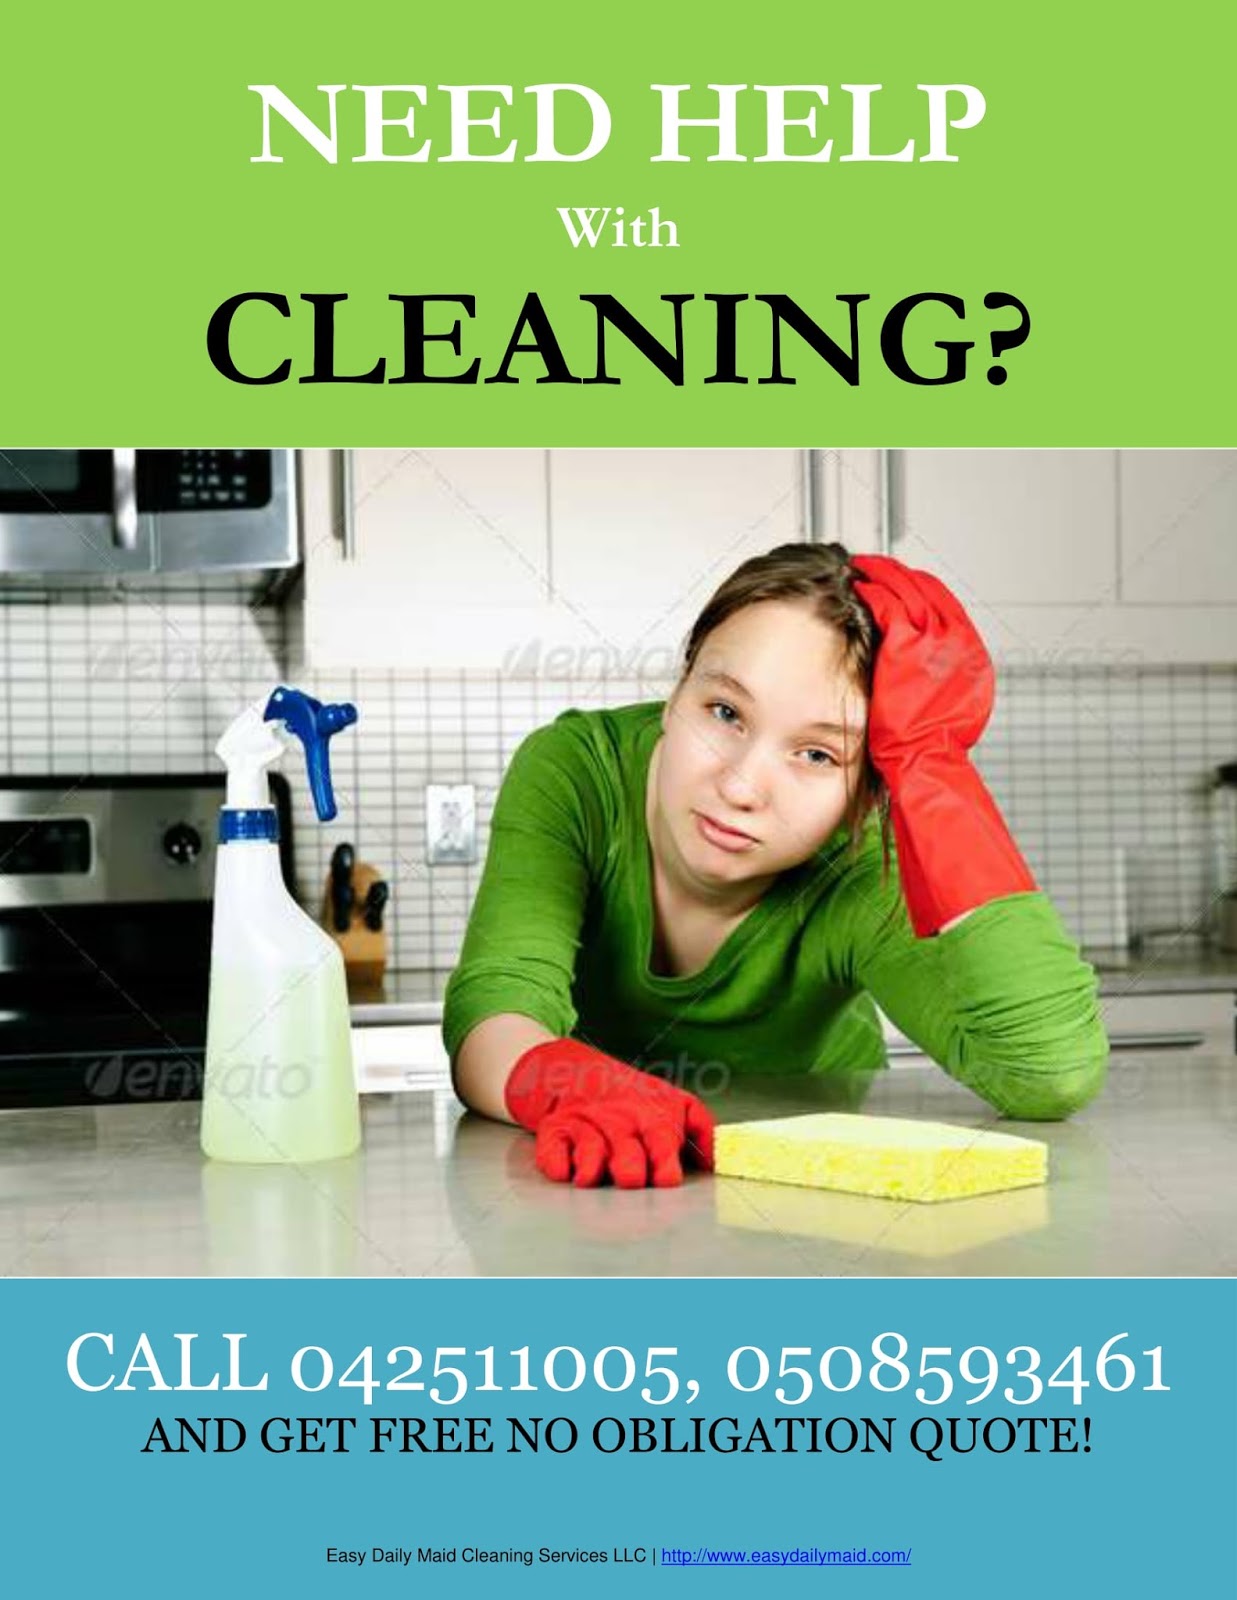 edm-commercial-cleaning-services-cleaning-made-easy